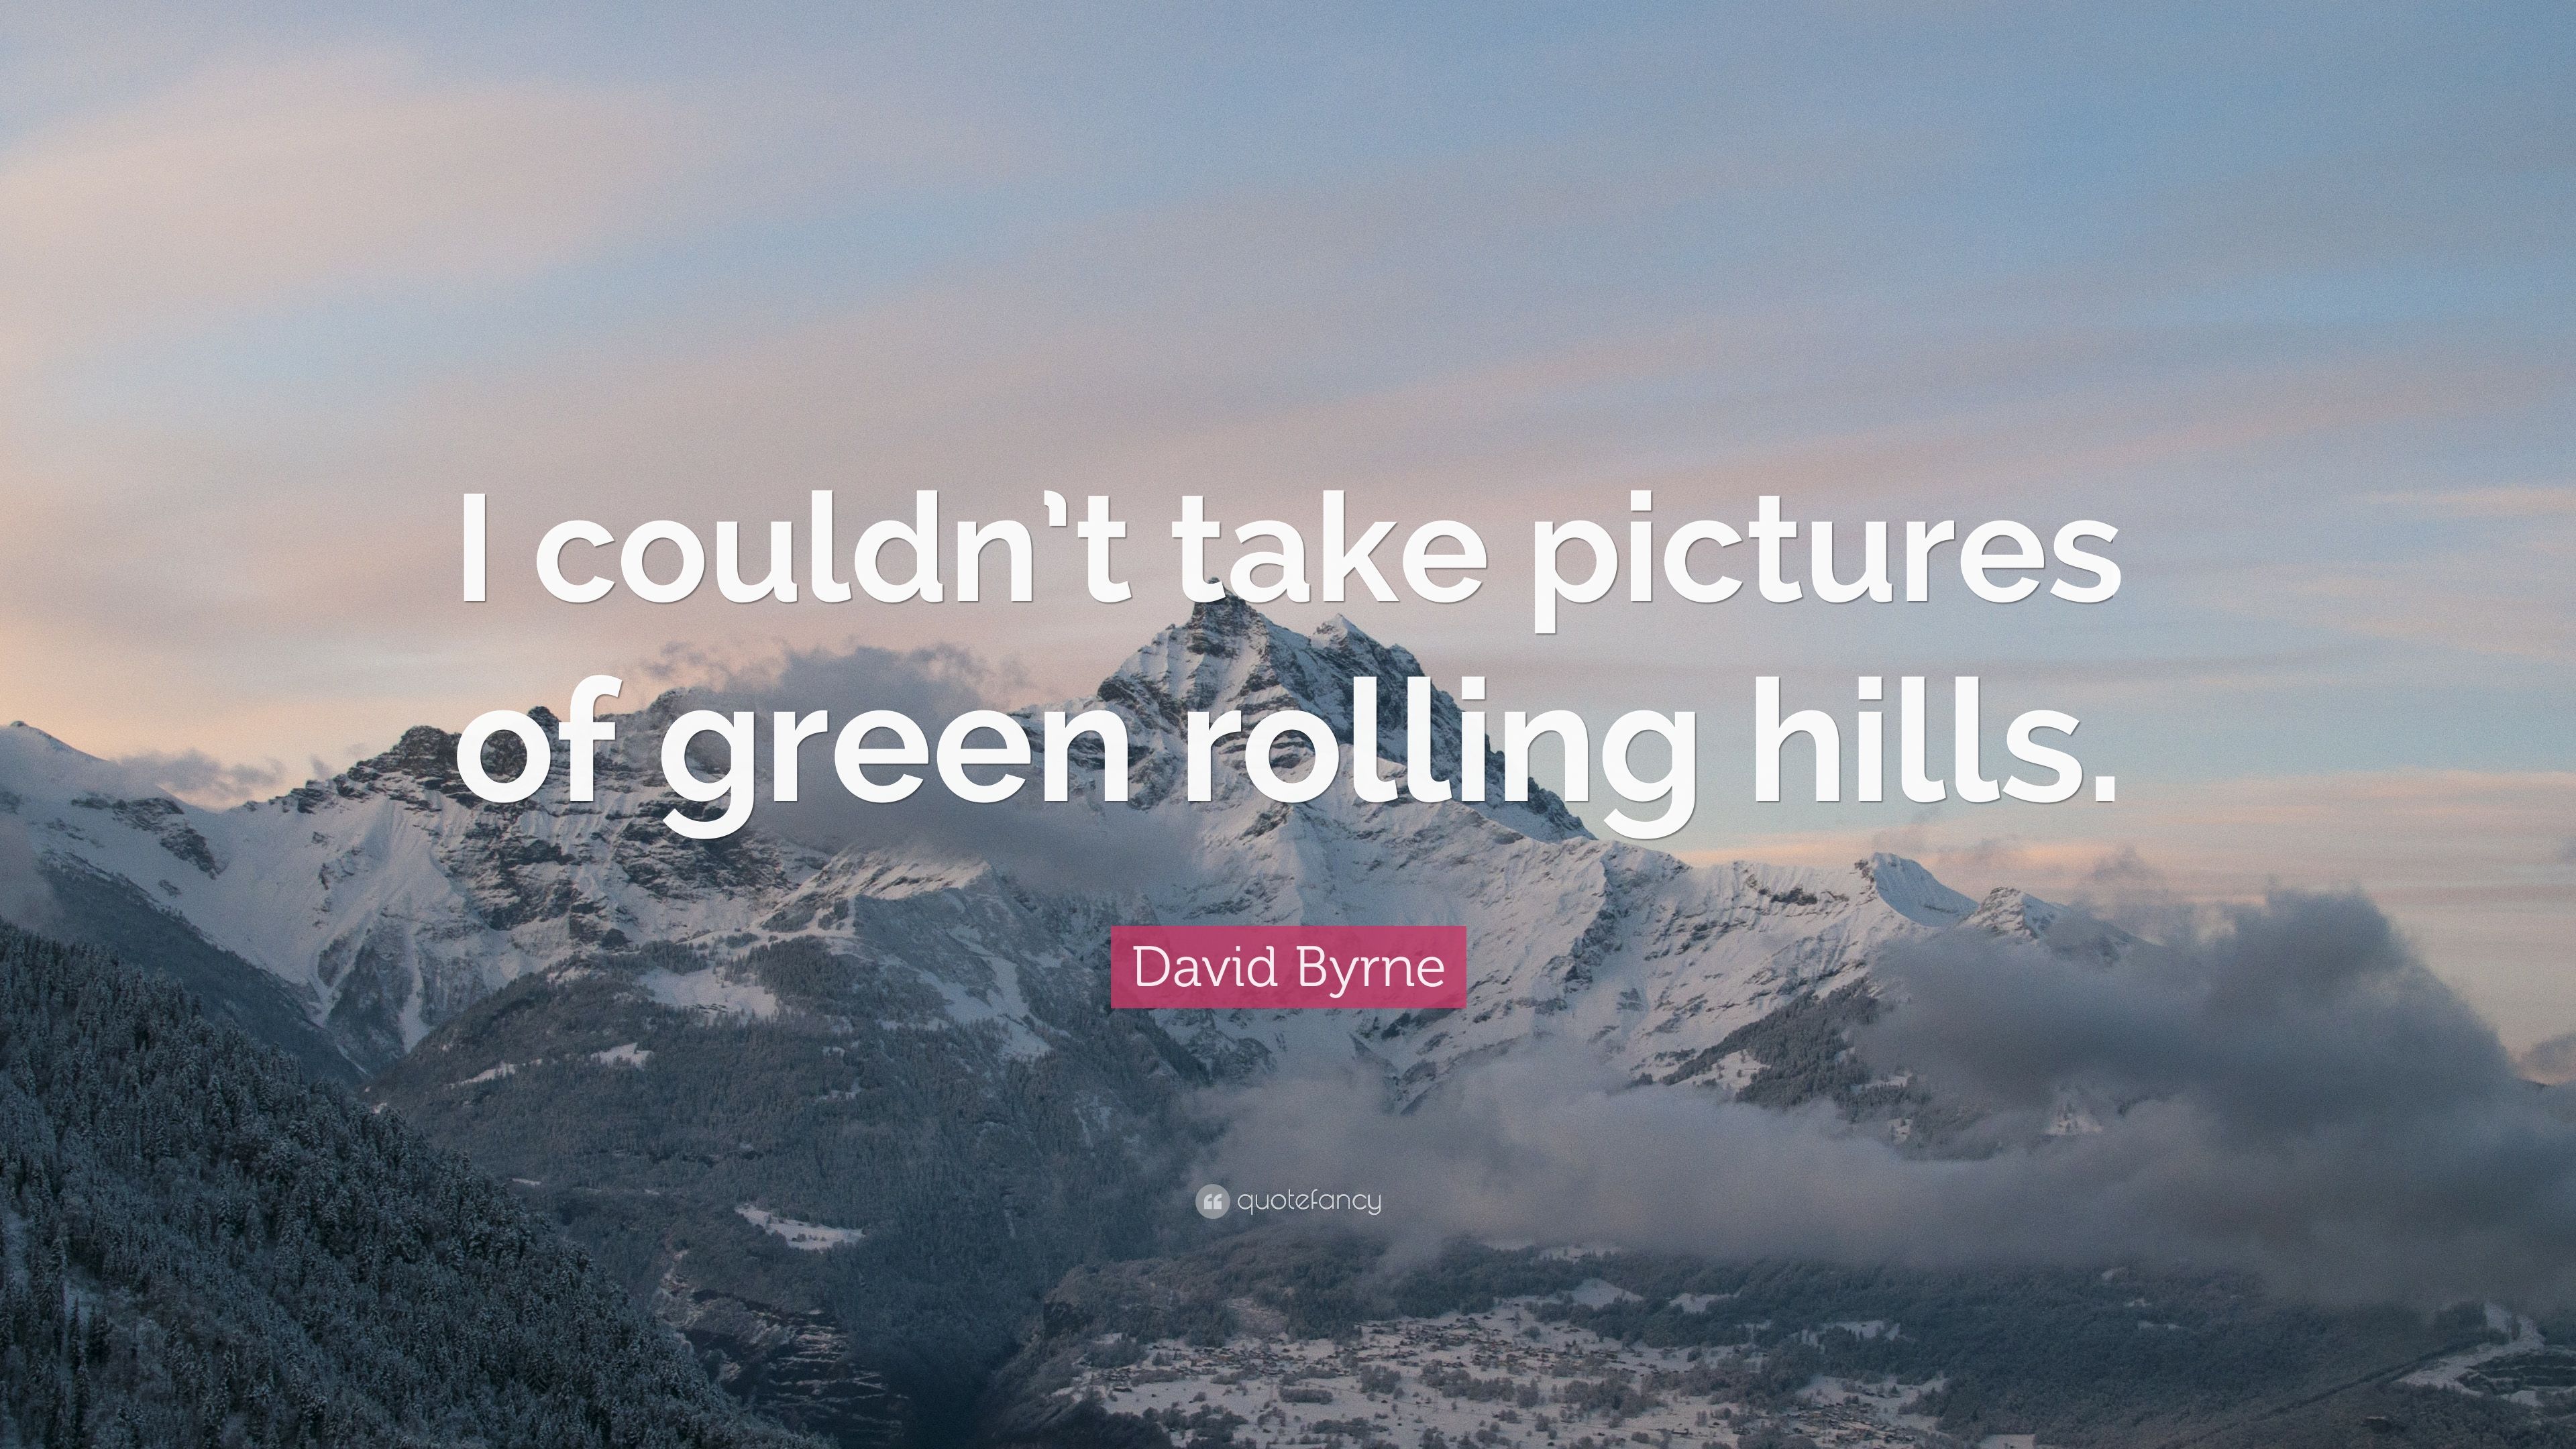 David Byrne Quote: “I couldn't take picture of green